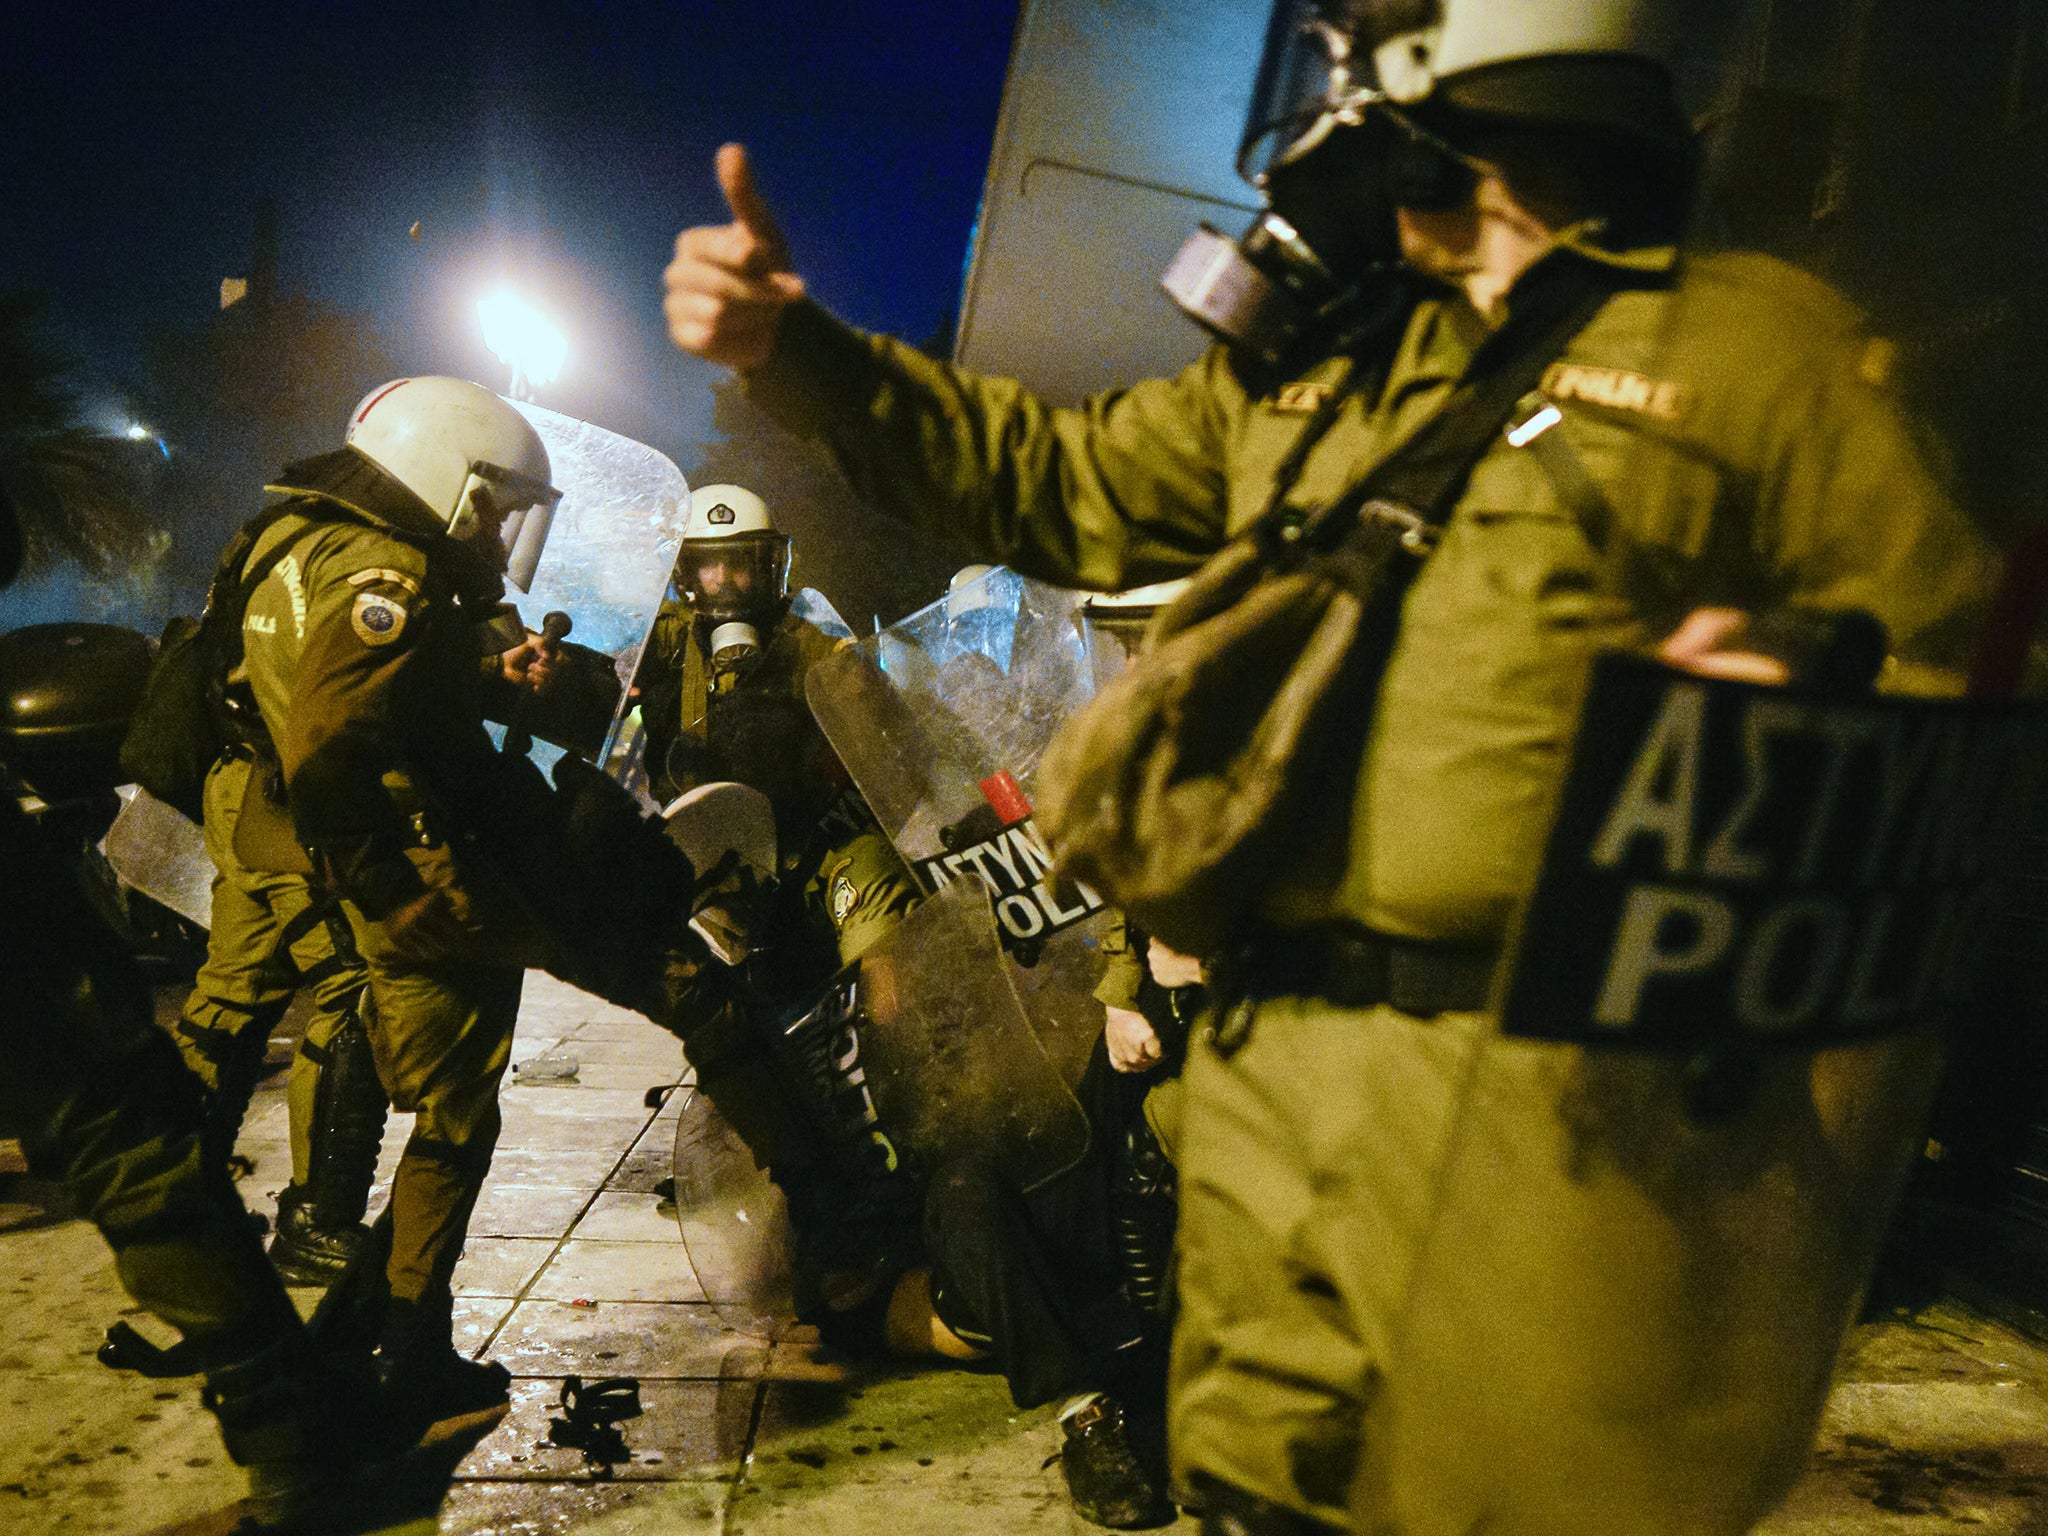 Riot policemen arrest a protester during an anti-austerity protest in front of the Greek parliament